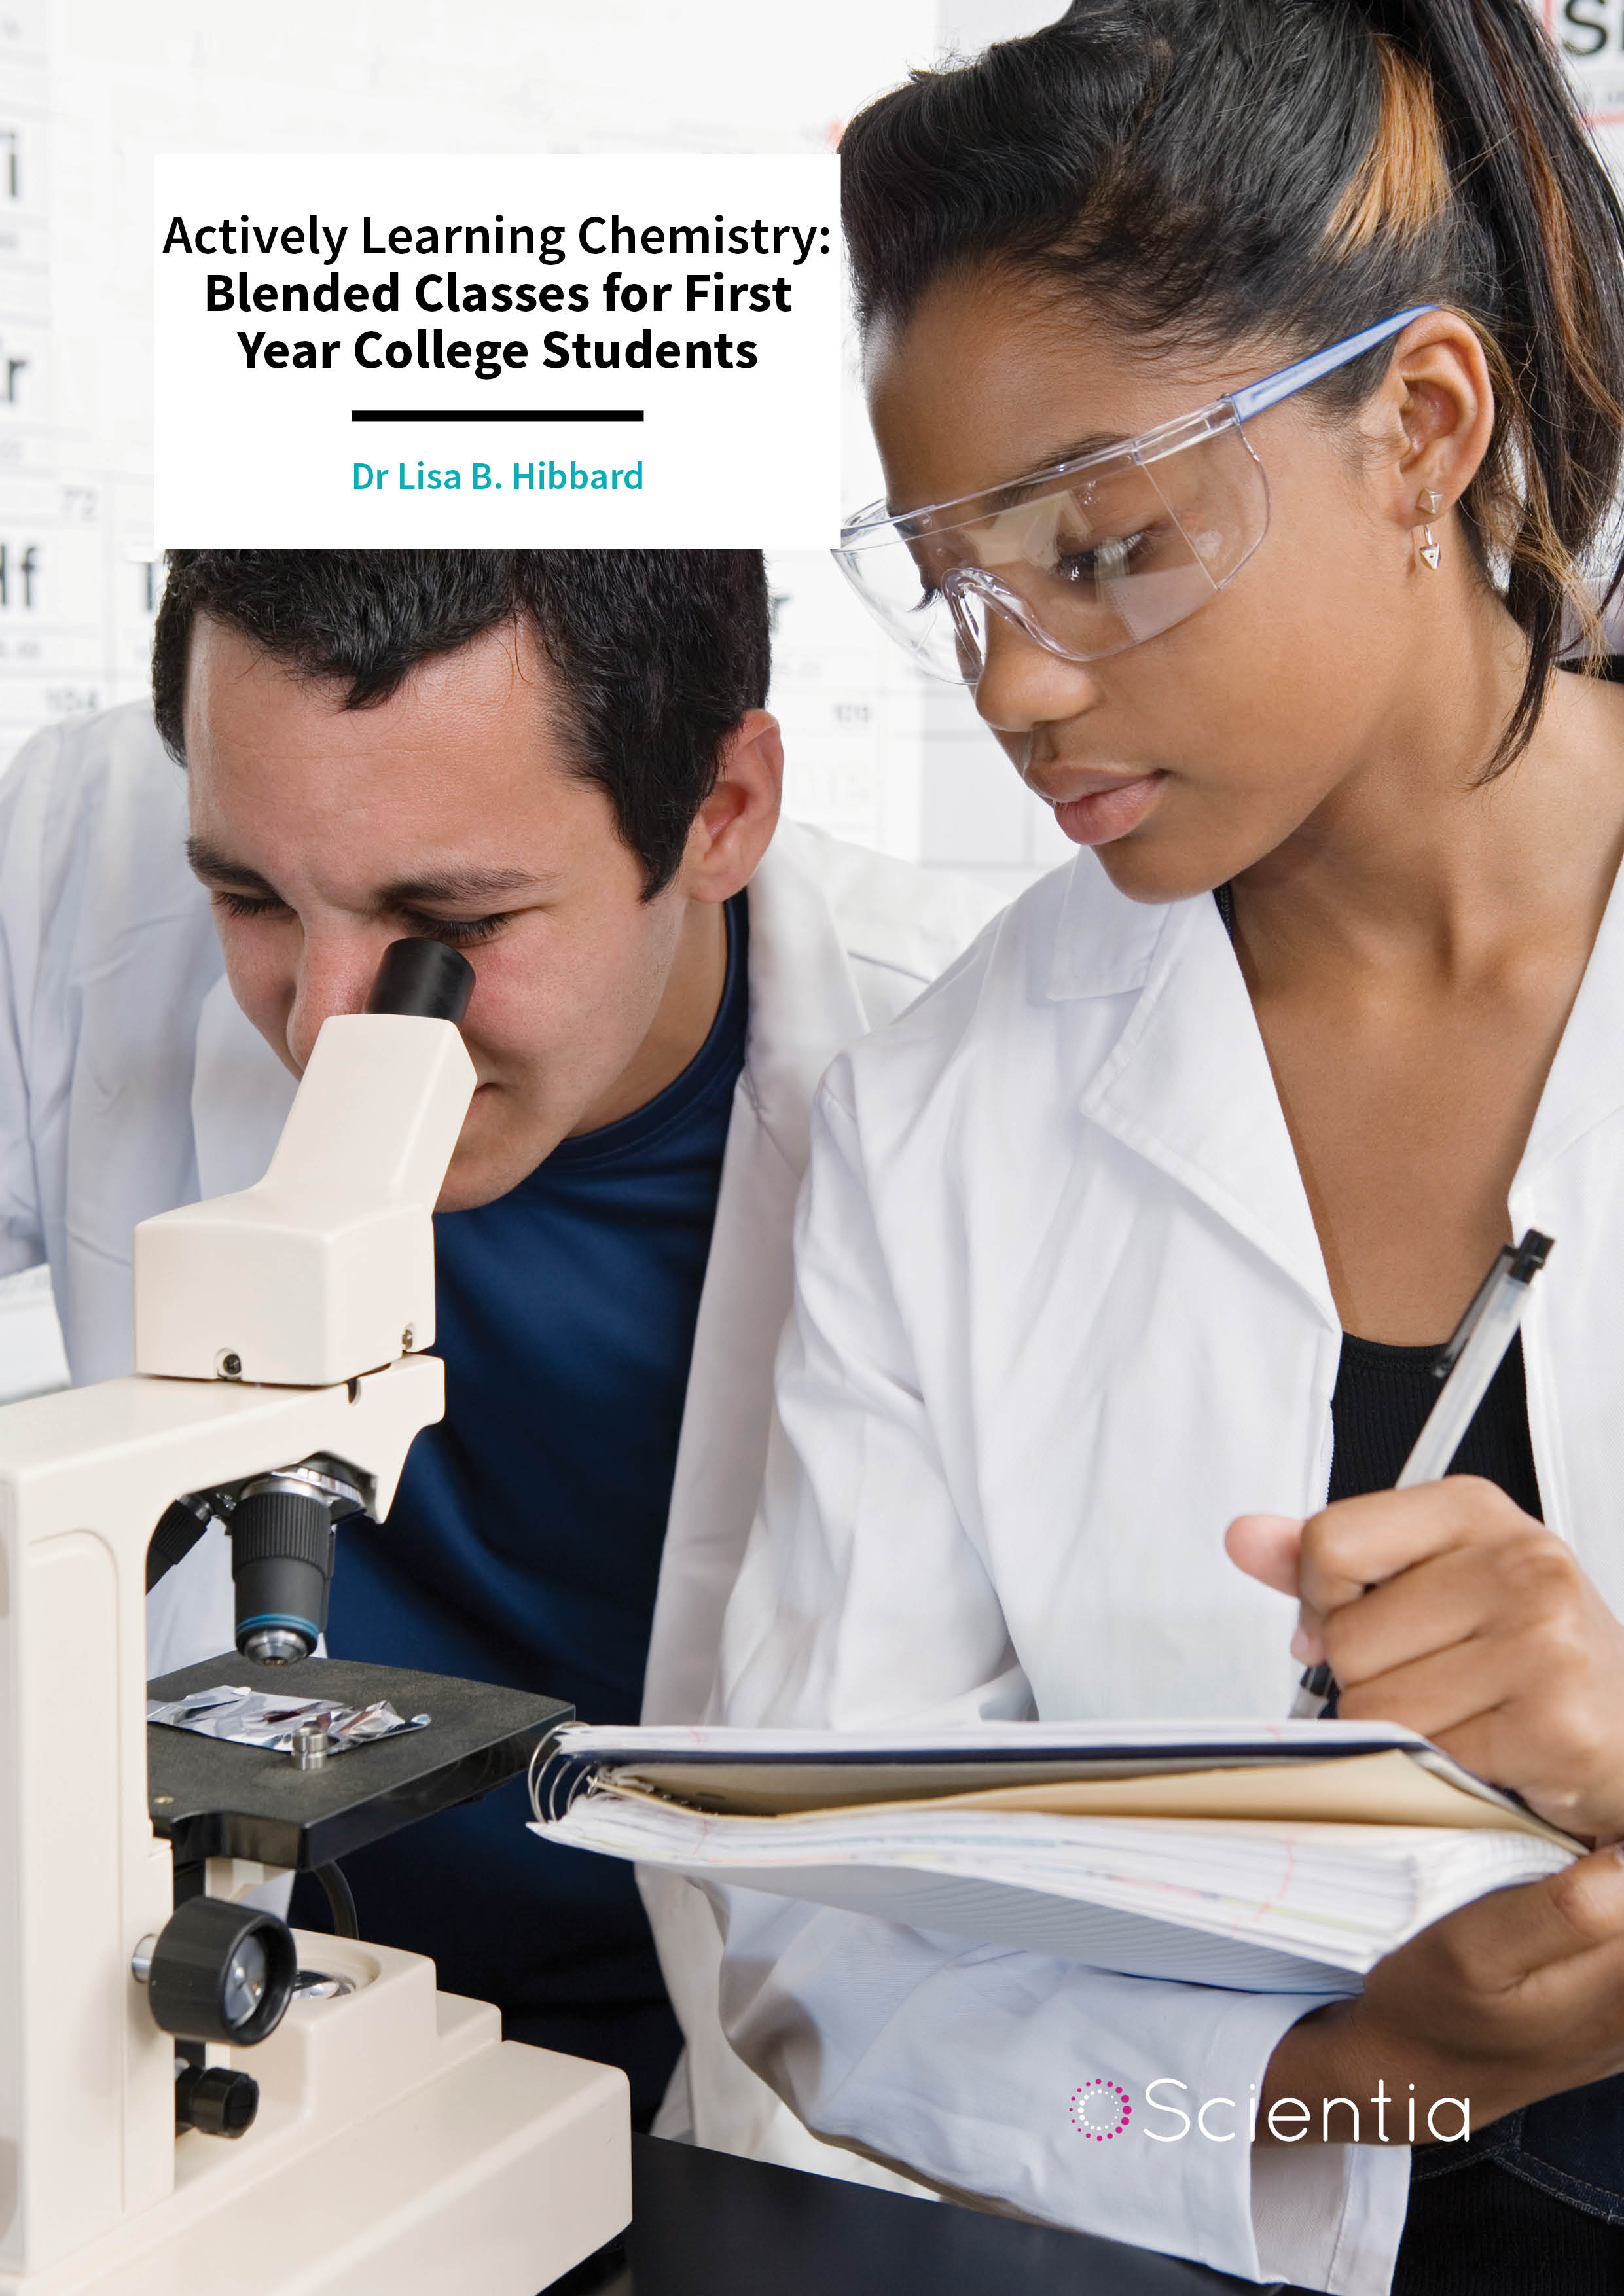 Dr Lisa Hibbard – Actively Learning Chemistry: Blended Classes for First Year College Students